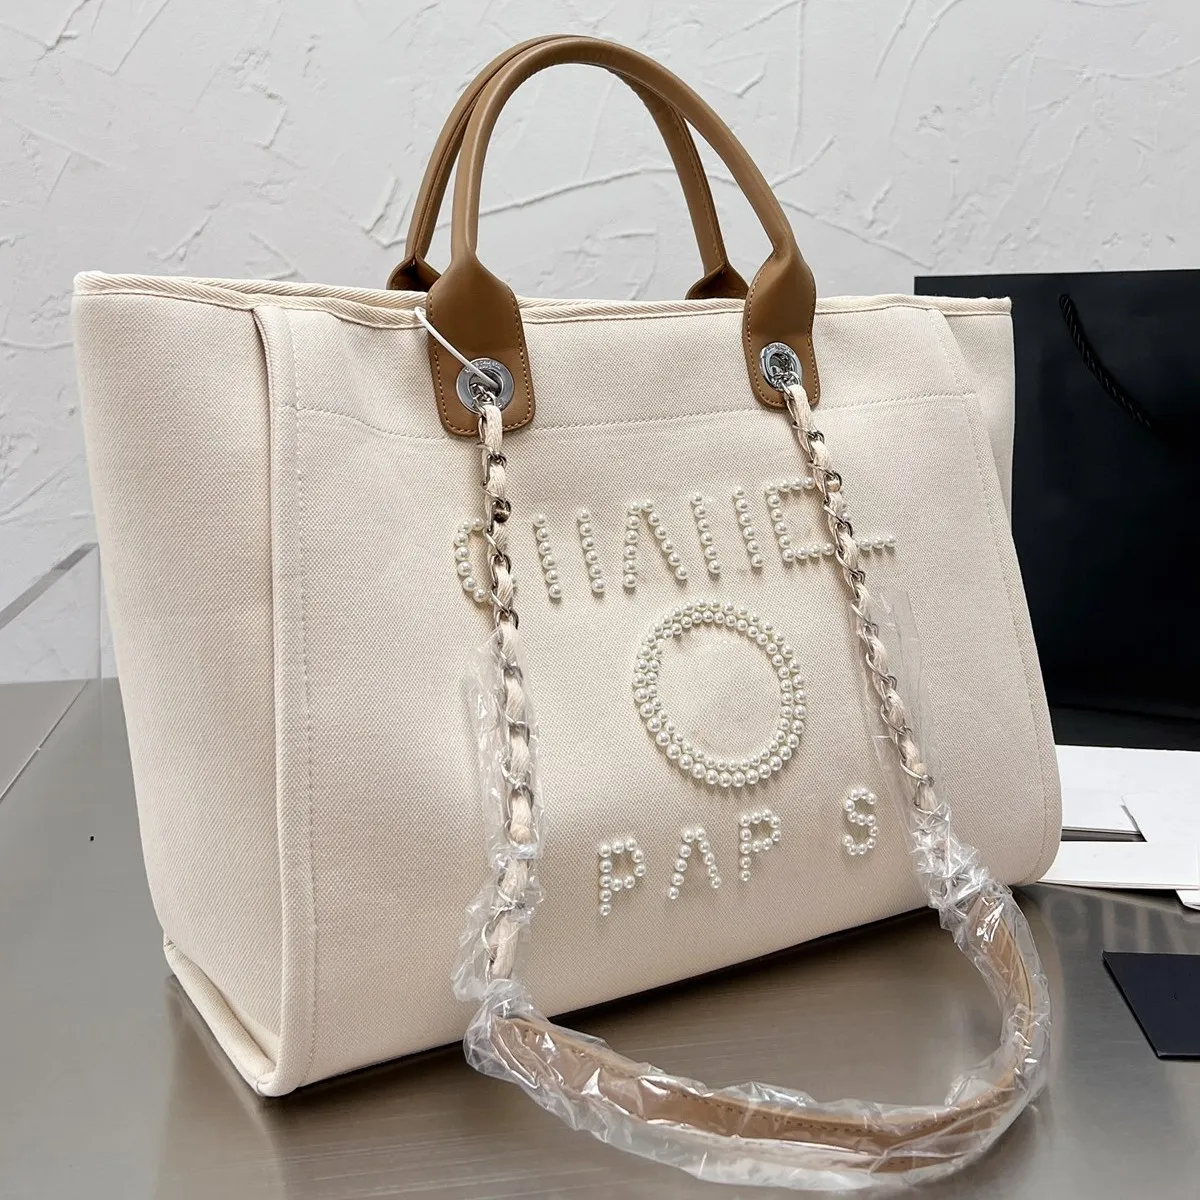 14 Best Chanel Deauville Tote Look Alike For Cute Girls!